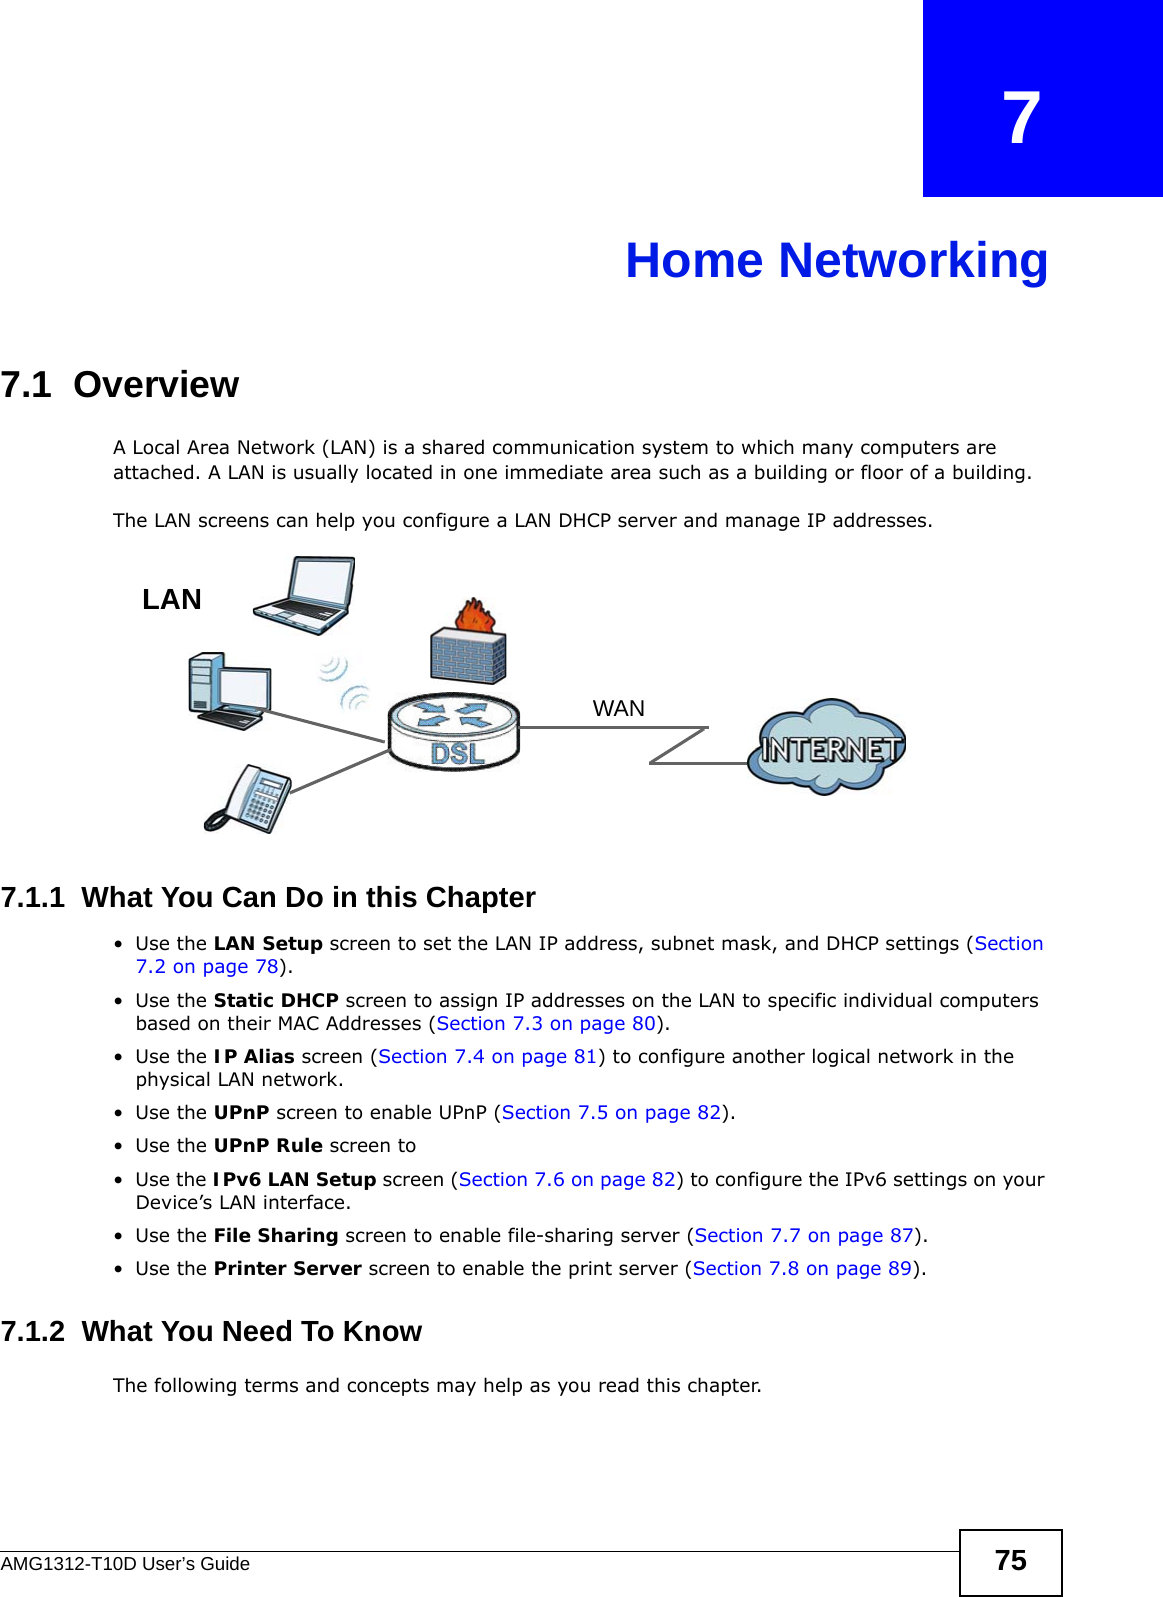 AMG1312-T10D User’s Guide 75CHAPTER   7Home Networking7.1  Overview  A Local Area Network (LAN) is a shared communication system to which many computers are attached. A LAN is usually located in one immediate area such as a building or floor of a building.The LAN screens can help you configure a LAN DHCP server and manage IP addresses.7.1.1  What You Can Do in this Chapter•Use the LAN Setup screen to set the LAN IP address, subnet mask, and DHCP settings (Section 7.2 on page 78). •Use the Static DHCP screen to assign IP addresses on the LAN to specific individual computers based on their MAC Addresses (Section 7.3 on page 80).•Use the IP Alias screen (Section 7.4 on page 81) to configure another logical network in the physical LAN network.•Use the UPnP screen to enable UPnP (Section 7.5 on page 82). •Use the UPnP Rule screen to •Use the IPv6 LAN Setup screen (Section 7.6 on page 82) to configure the IPv6 settings on your Device’s LAN interface.•Use the File Sharing screen to enable file-sharing server (Section 7.7 on page 87). •Use the Printer Server screen to enable the print server (Section 7.8 on page 89).7.1.2  What You Need To KnowThe following terms and concepts may help as you read this chapter.WANLAN